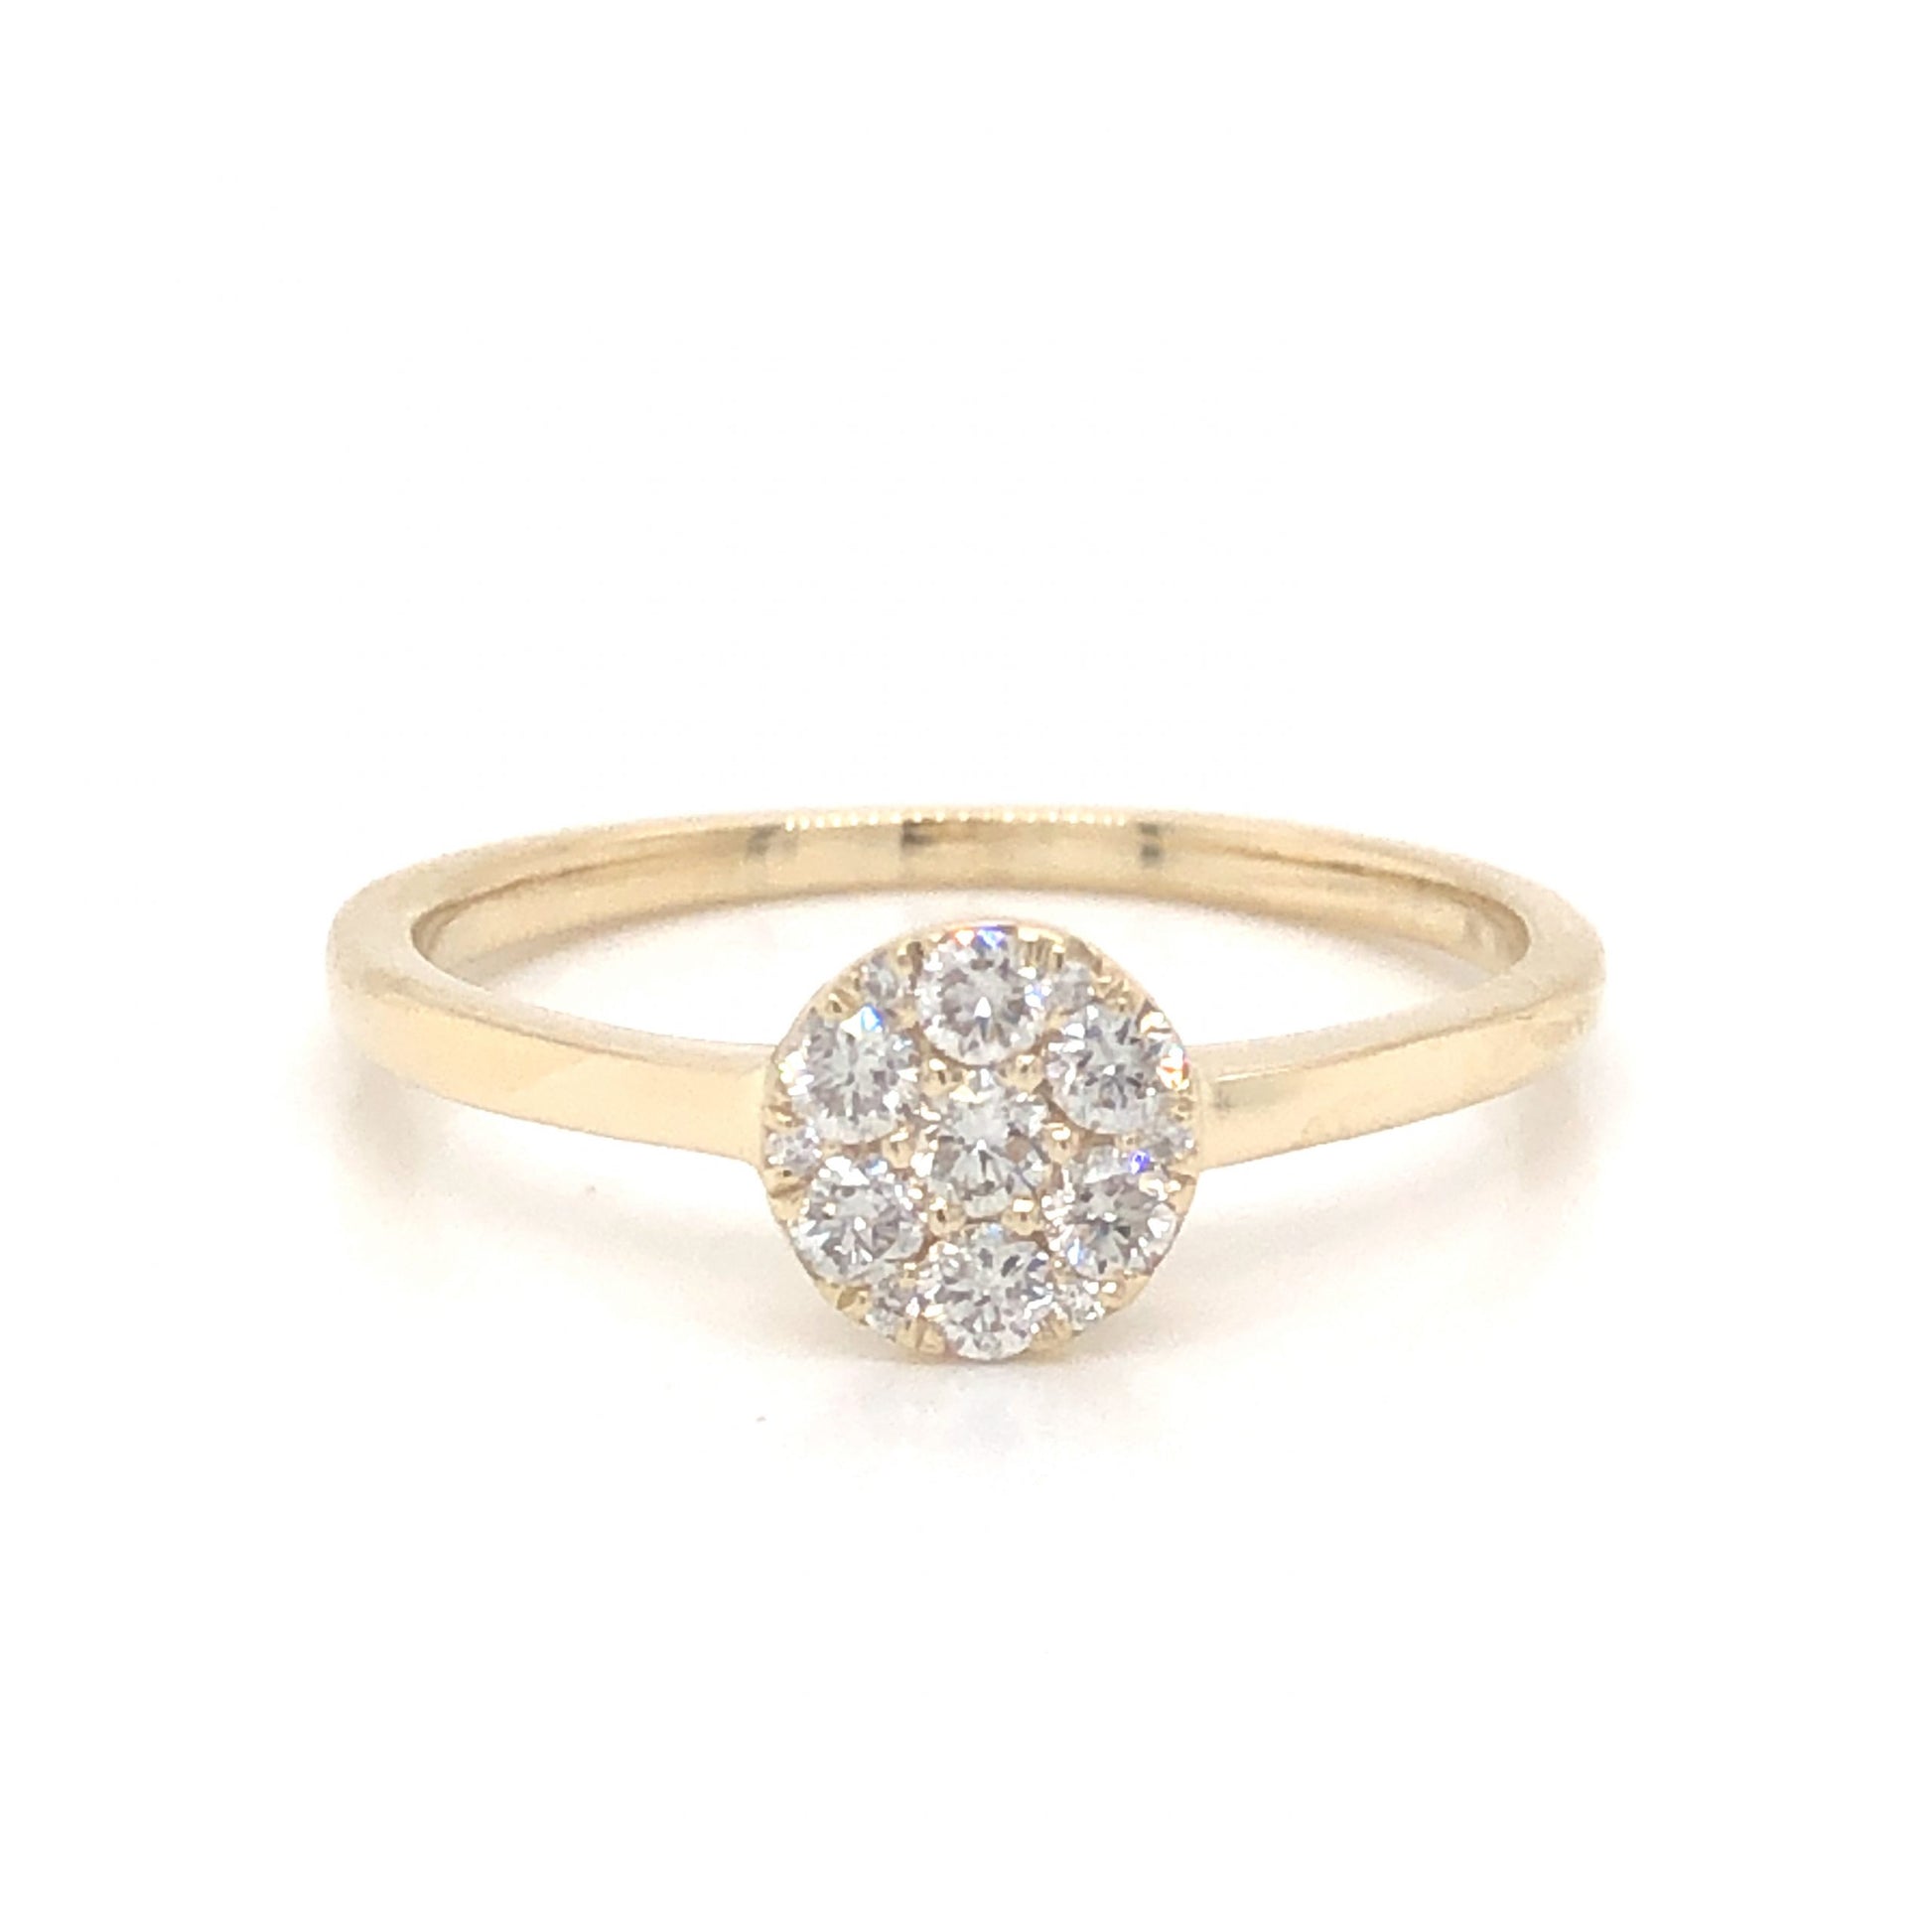 .26 Pave Diamond Stacking Ring in 14k Yellow GoldComposition: 14 Karat Yellow GoldRing Size: 6.5Total Diamond Weight: .26 ctTotal Gram Weight: 1.9 gInscription: 14k 